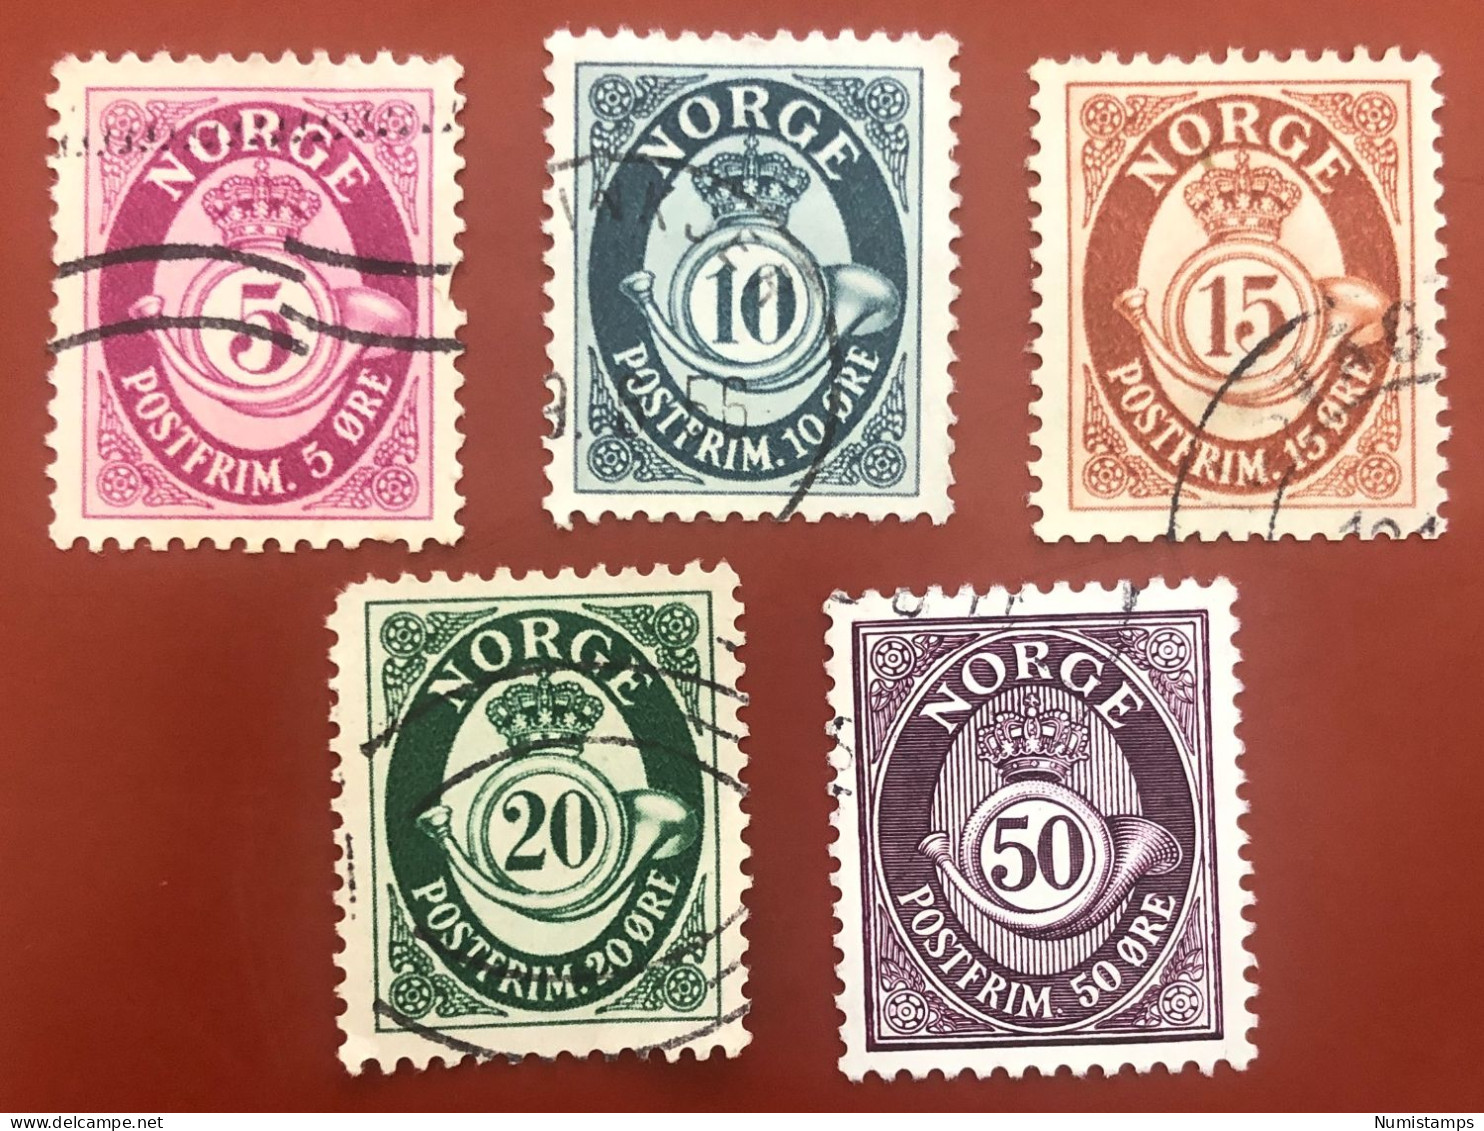 Norway - Post Horn (Series) - Used Stamps